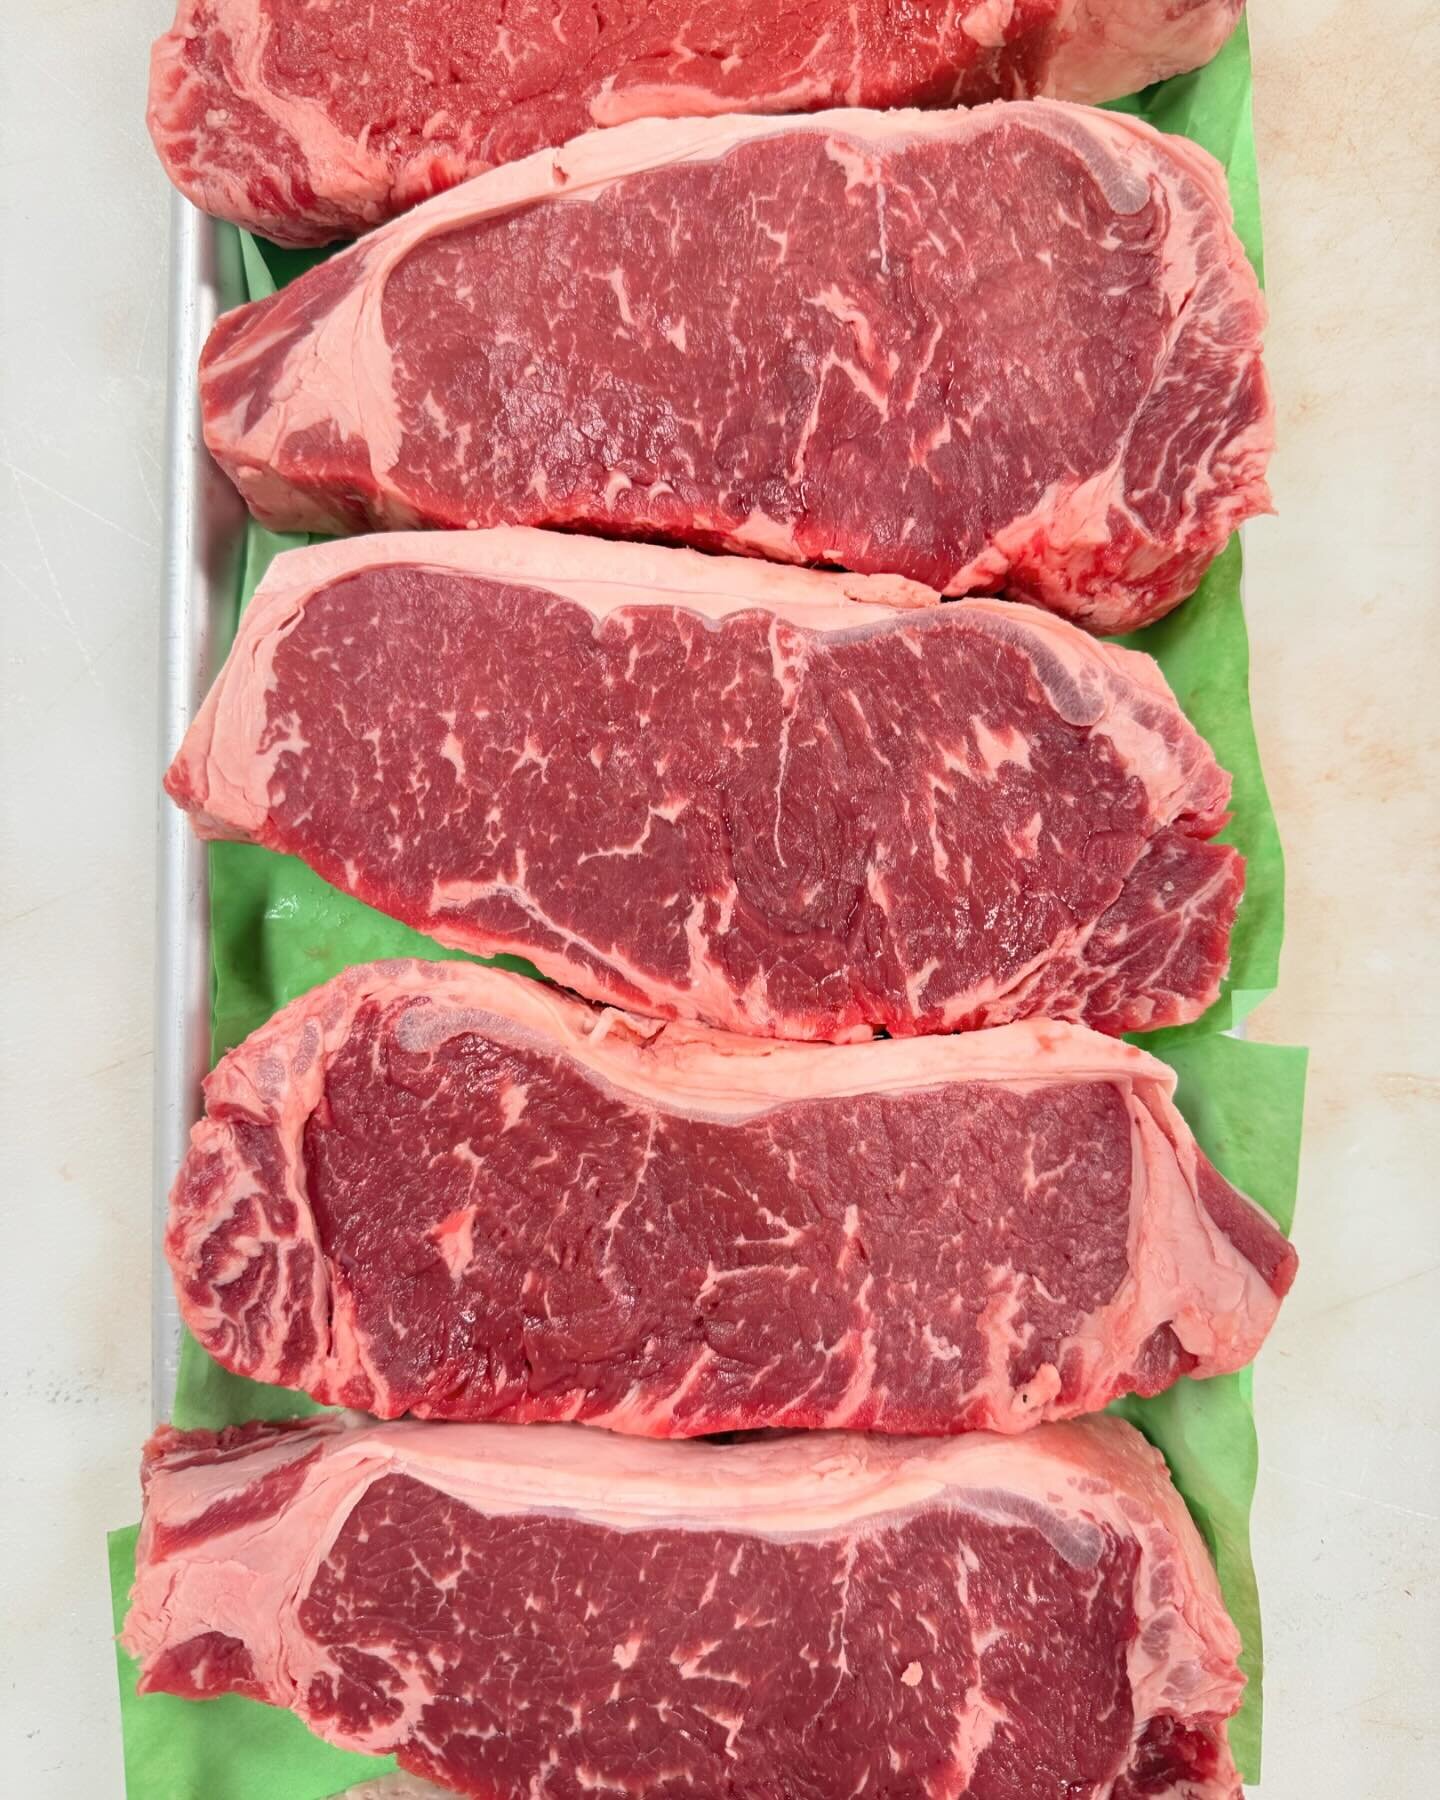 STEAK SPECIAL!!! 🥩 

Enjoy our steak special this weekend! USDA Choice NY Strip for $9.99 per steak!! These are 14oz and Certified Angus. Available at BOTH locations! 

We also have USDA Choice Eye of Round Roasts for $7.99 lb at our SAN ANTONIO loc